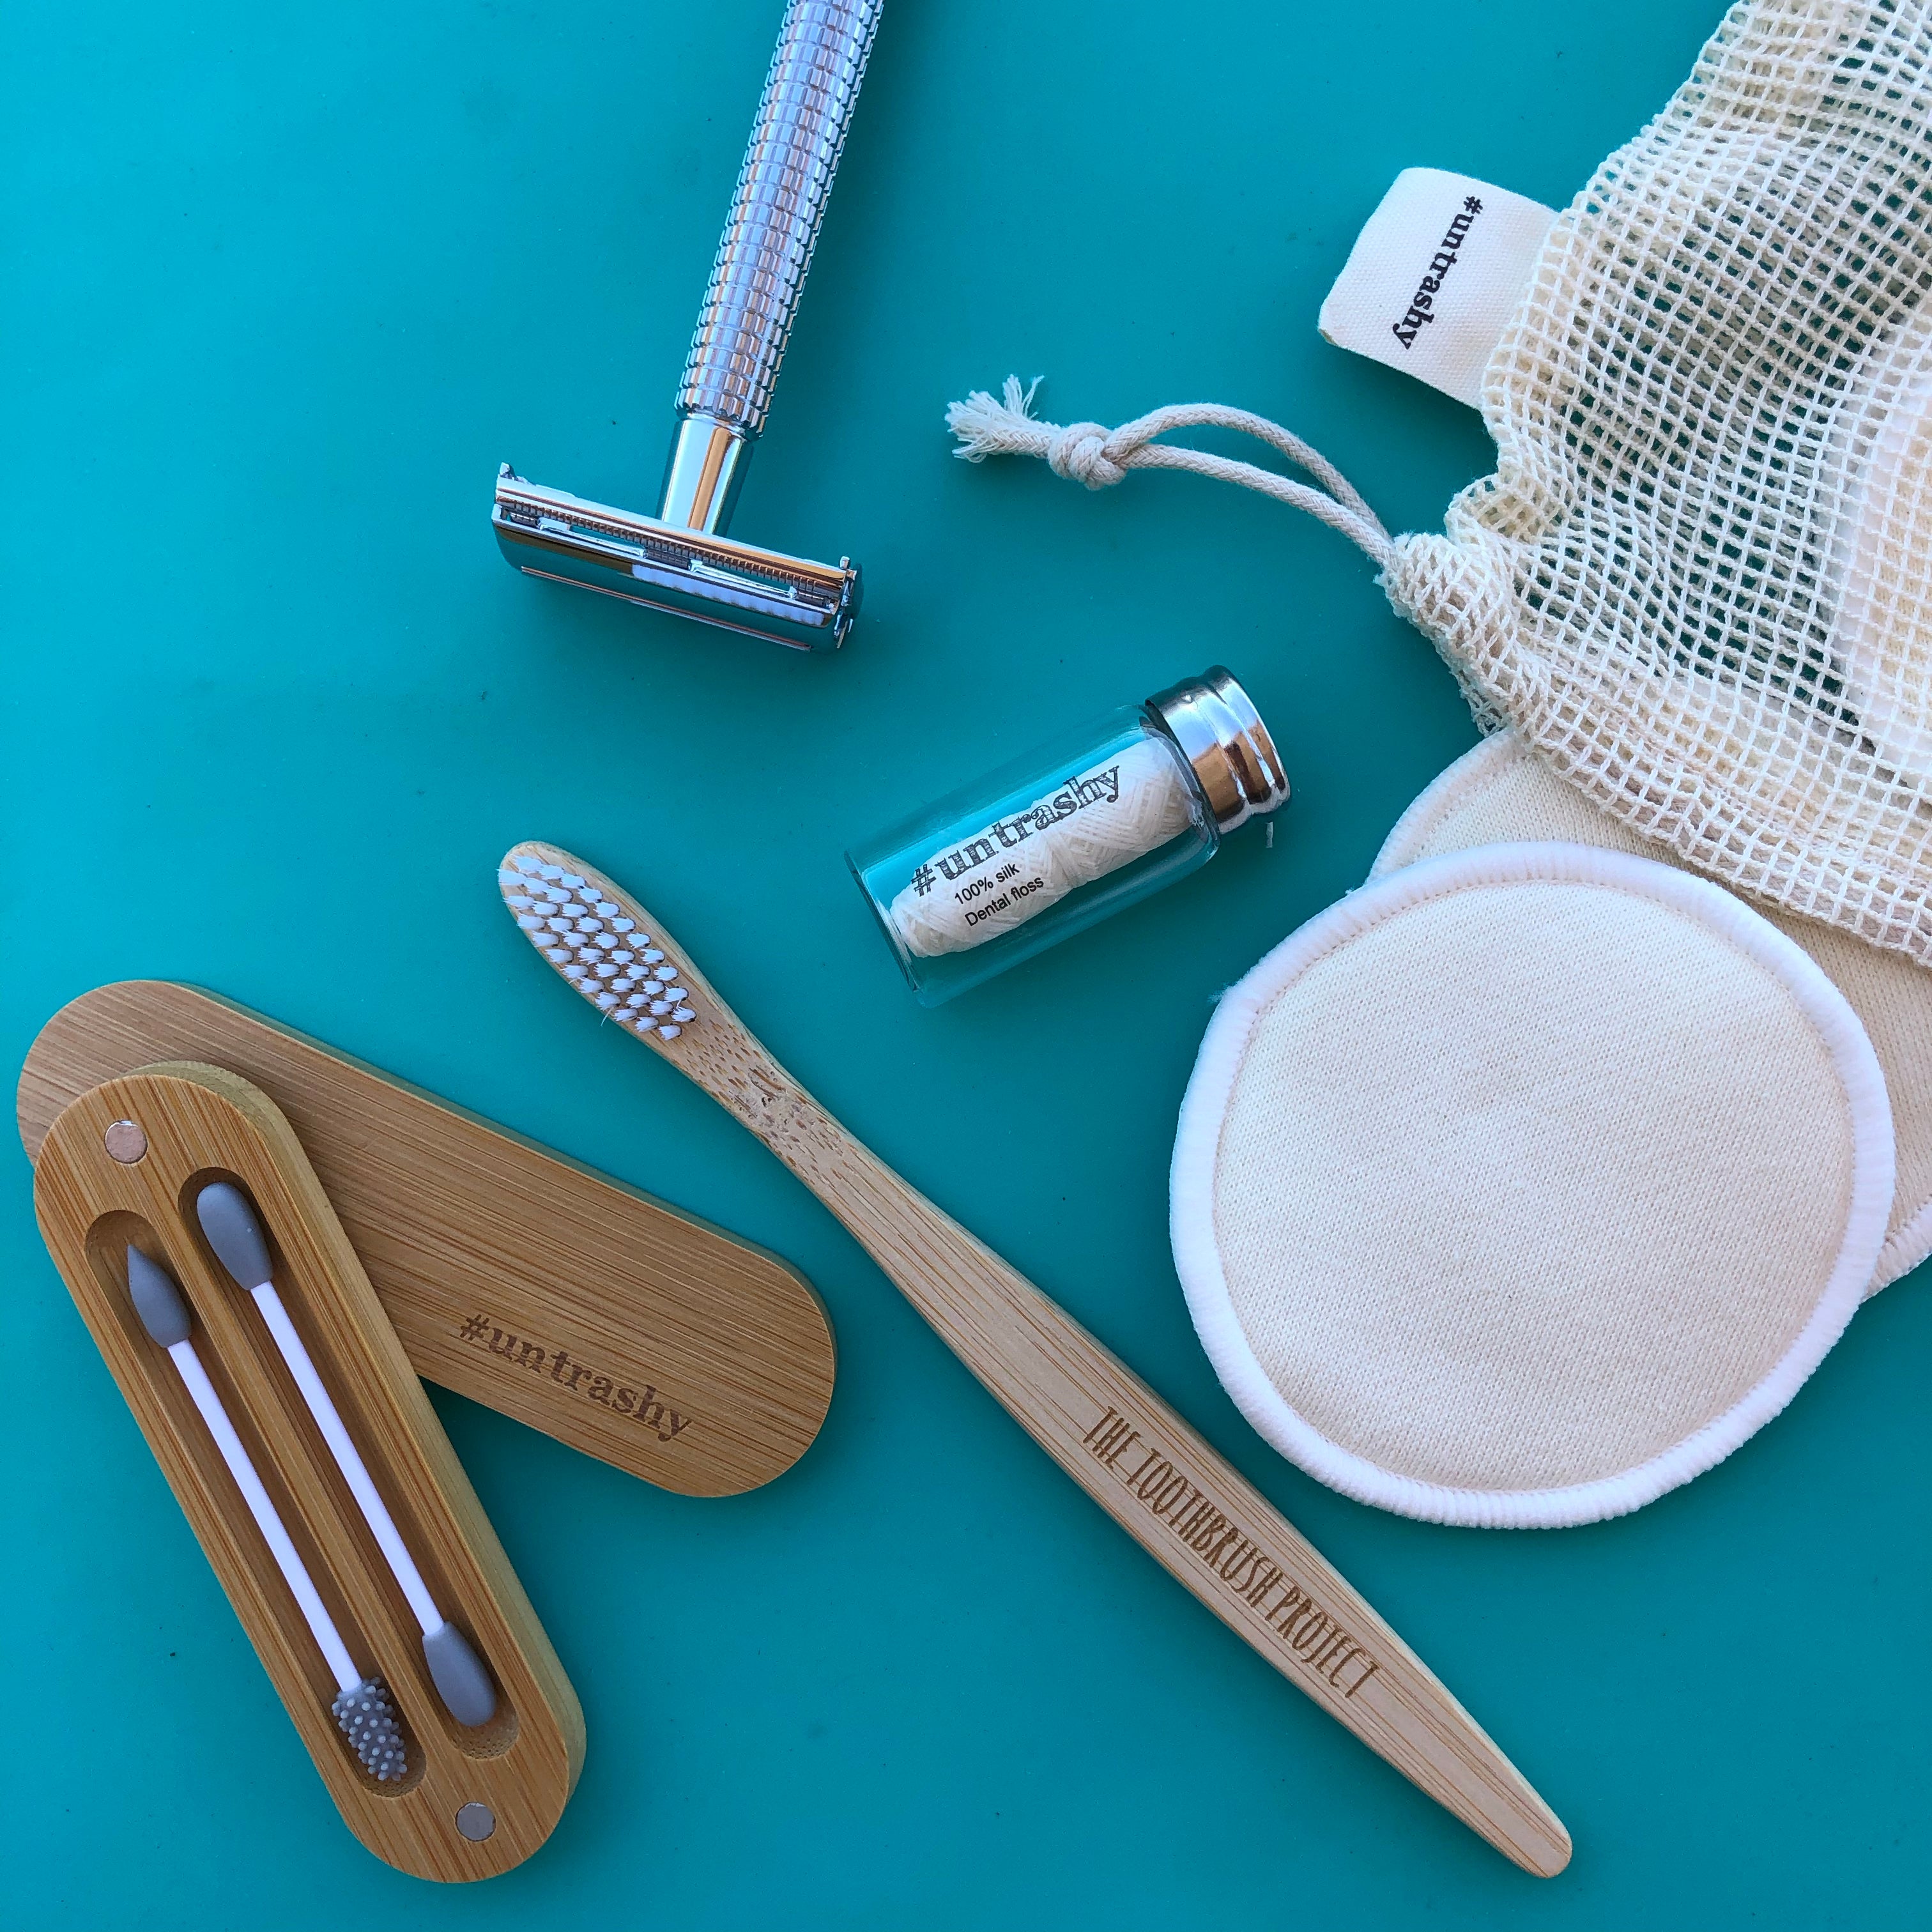 safety razor, makeup wipes, floss toothbrush and earbuds